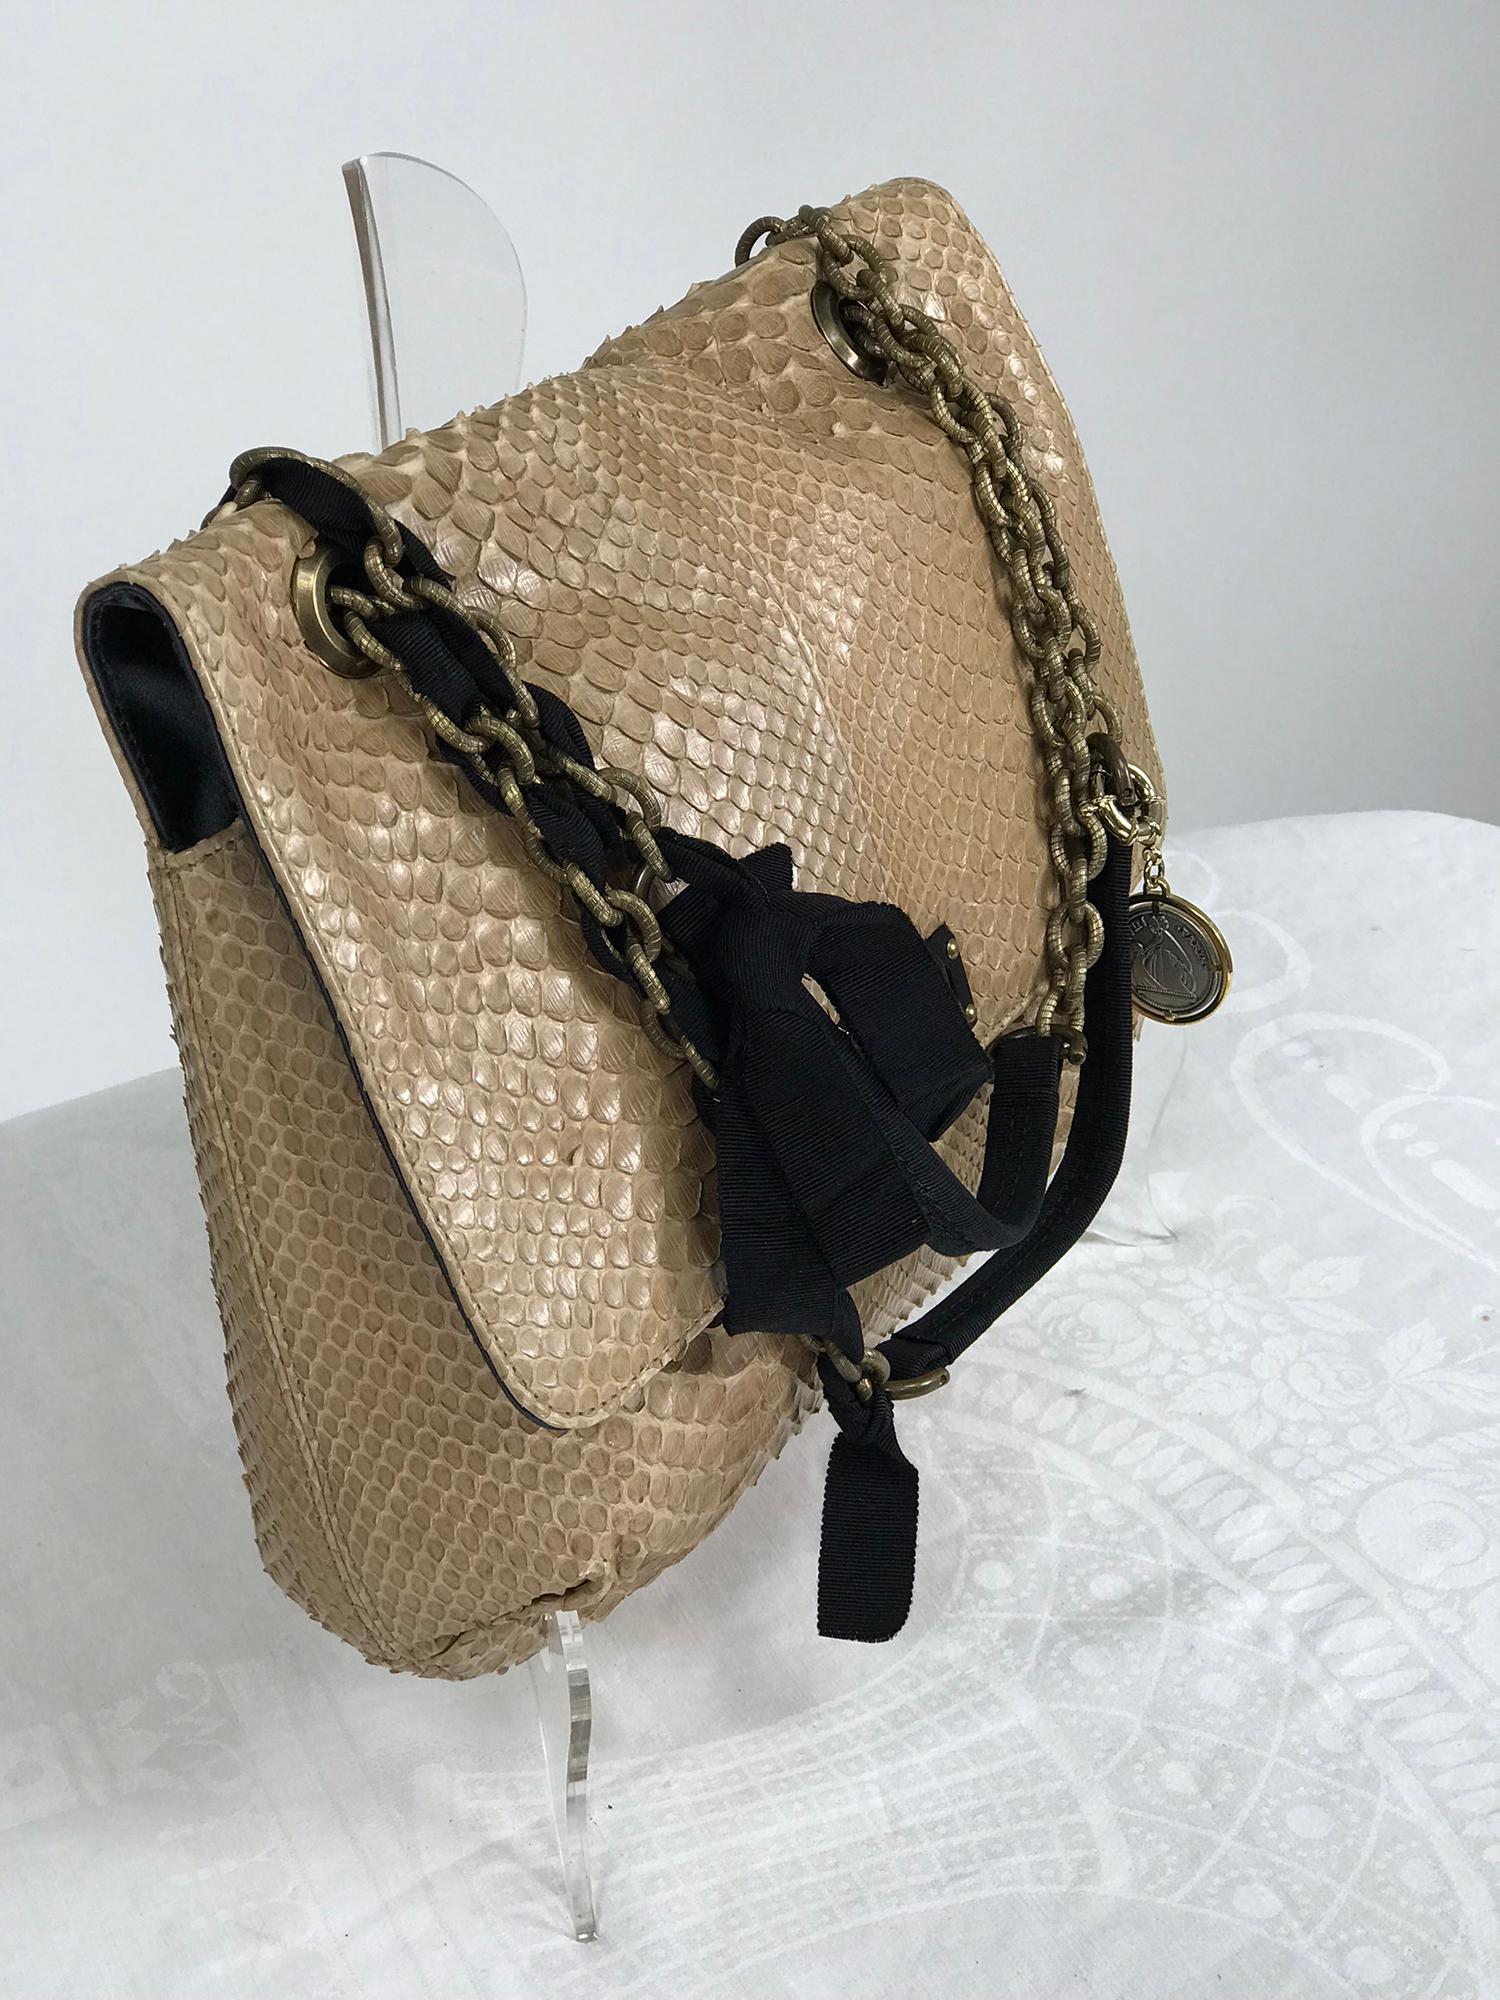 Lanvin Happy blond snakeskin with black faille trims and textured gold chain, black Lucite turn lock and plate with gold hardware. This beautiful bag is in very good pre owned condition, the combination of light and dark is a classic stand out.
The